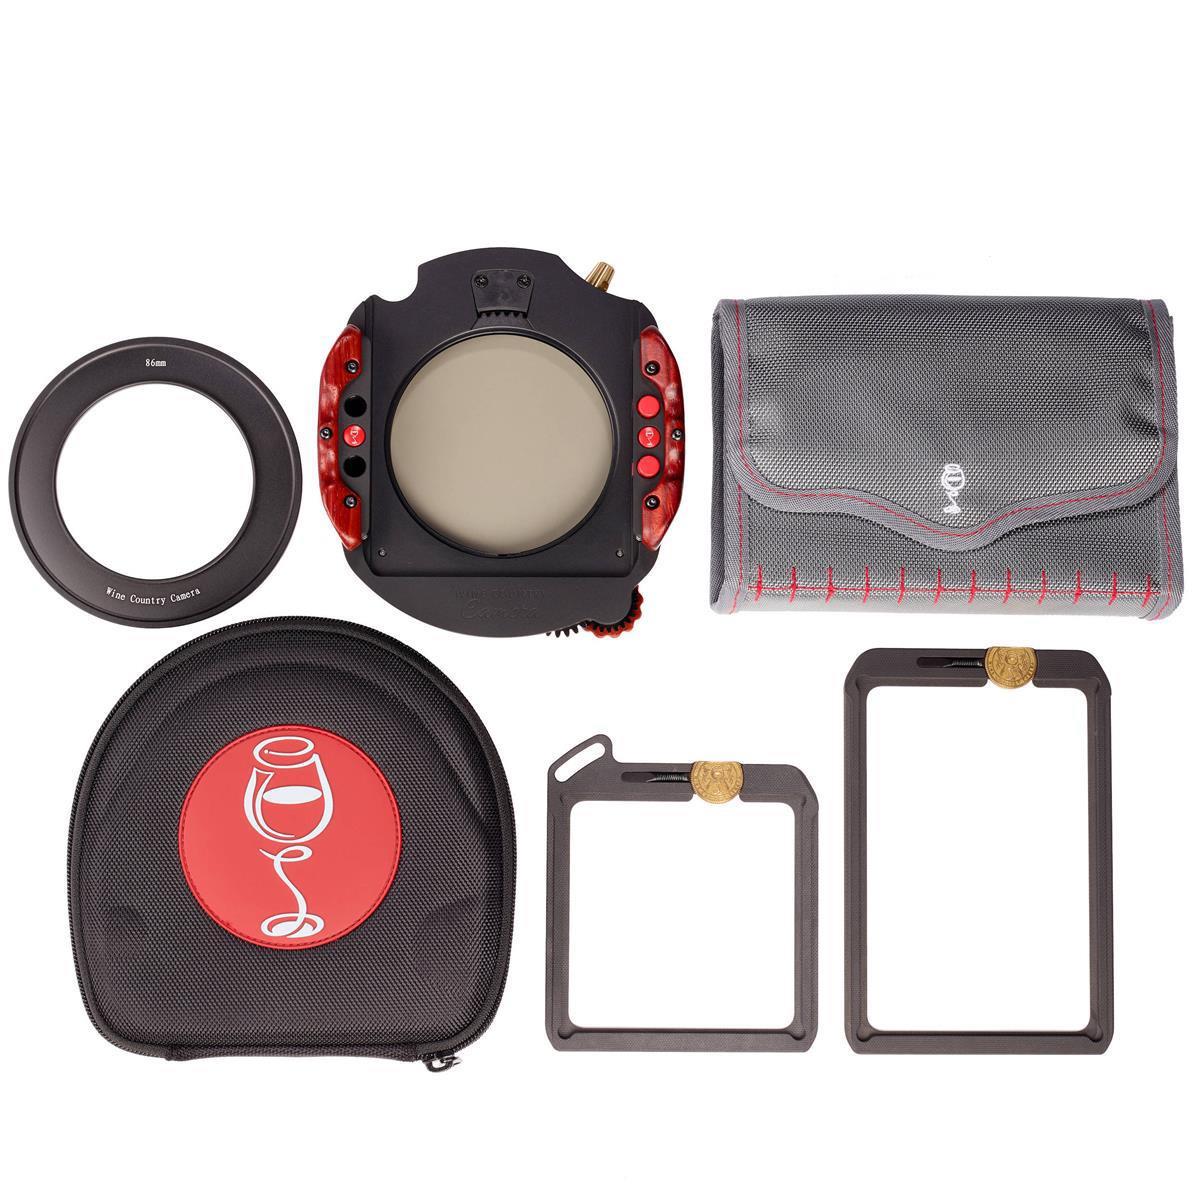 Image of Wine Country Camera Filter Holder Kit